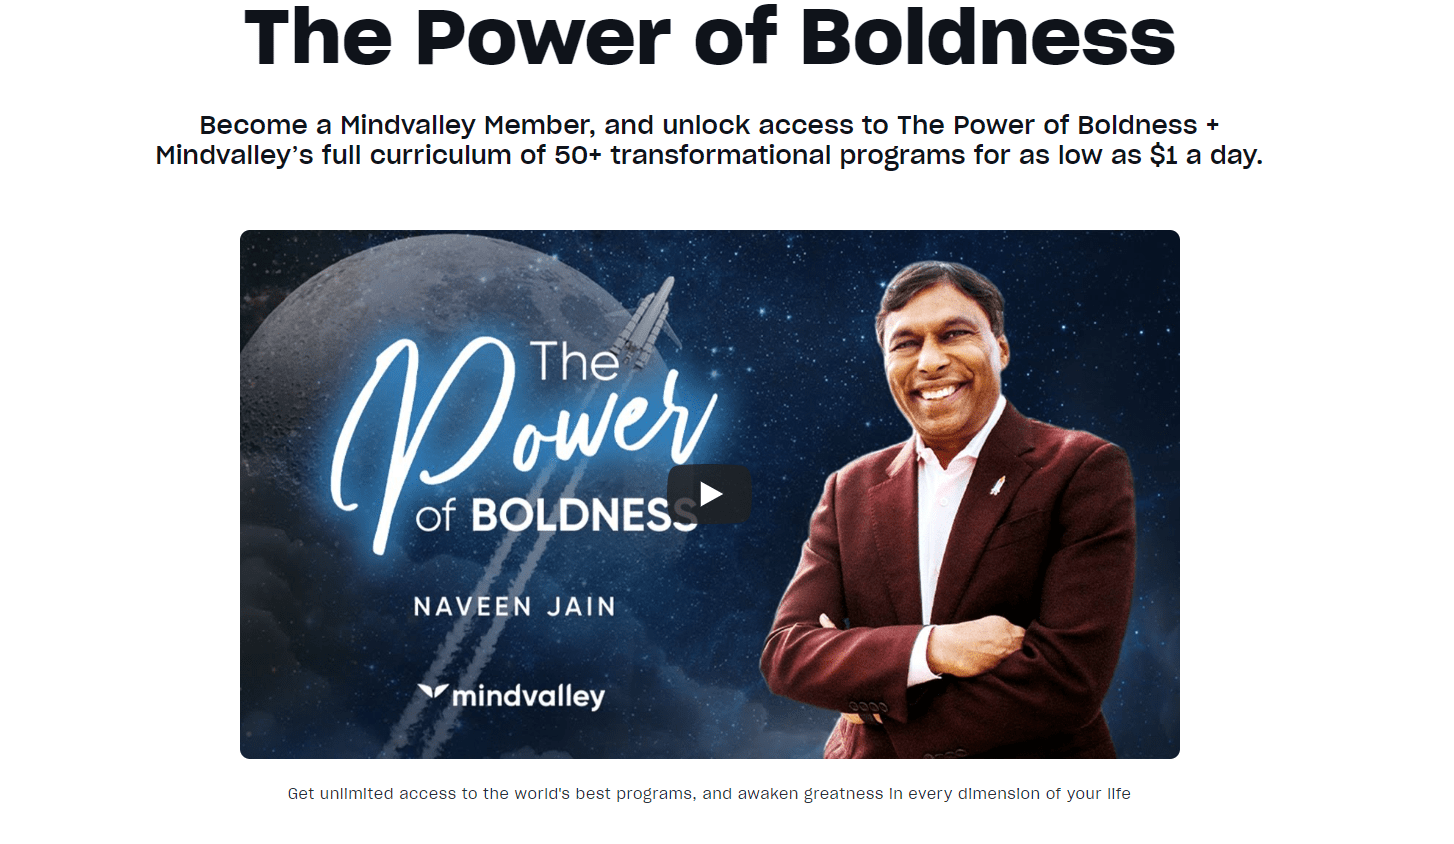 The power of boldness by naveen jain